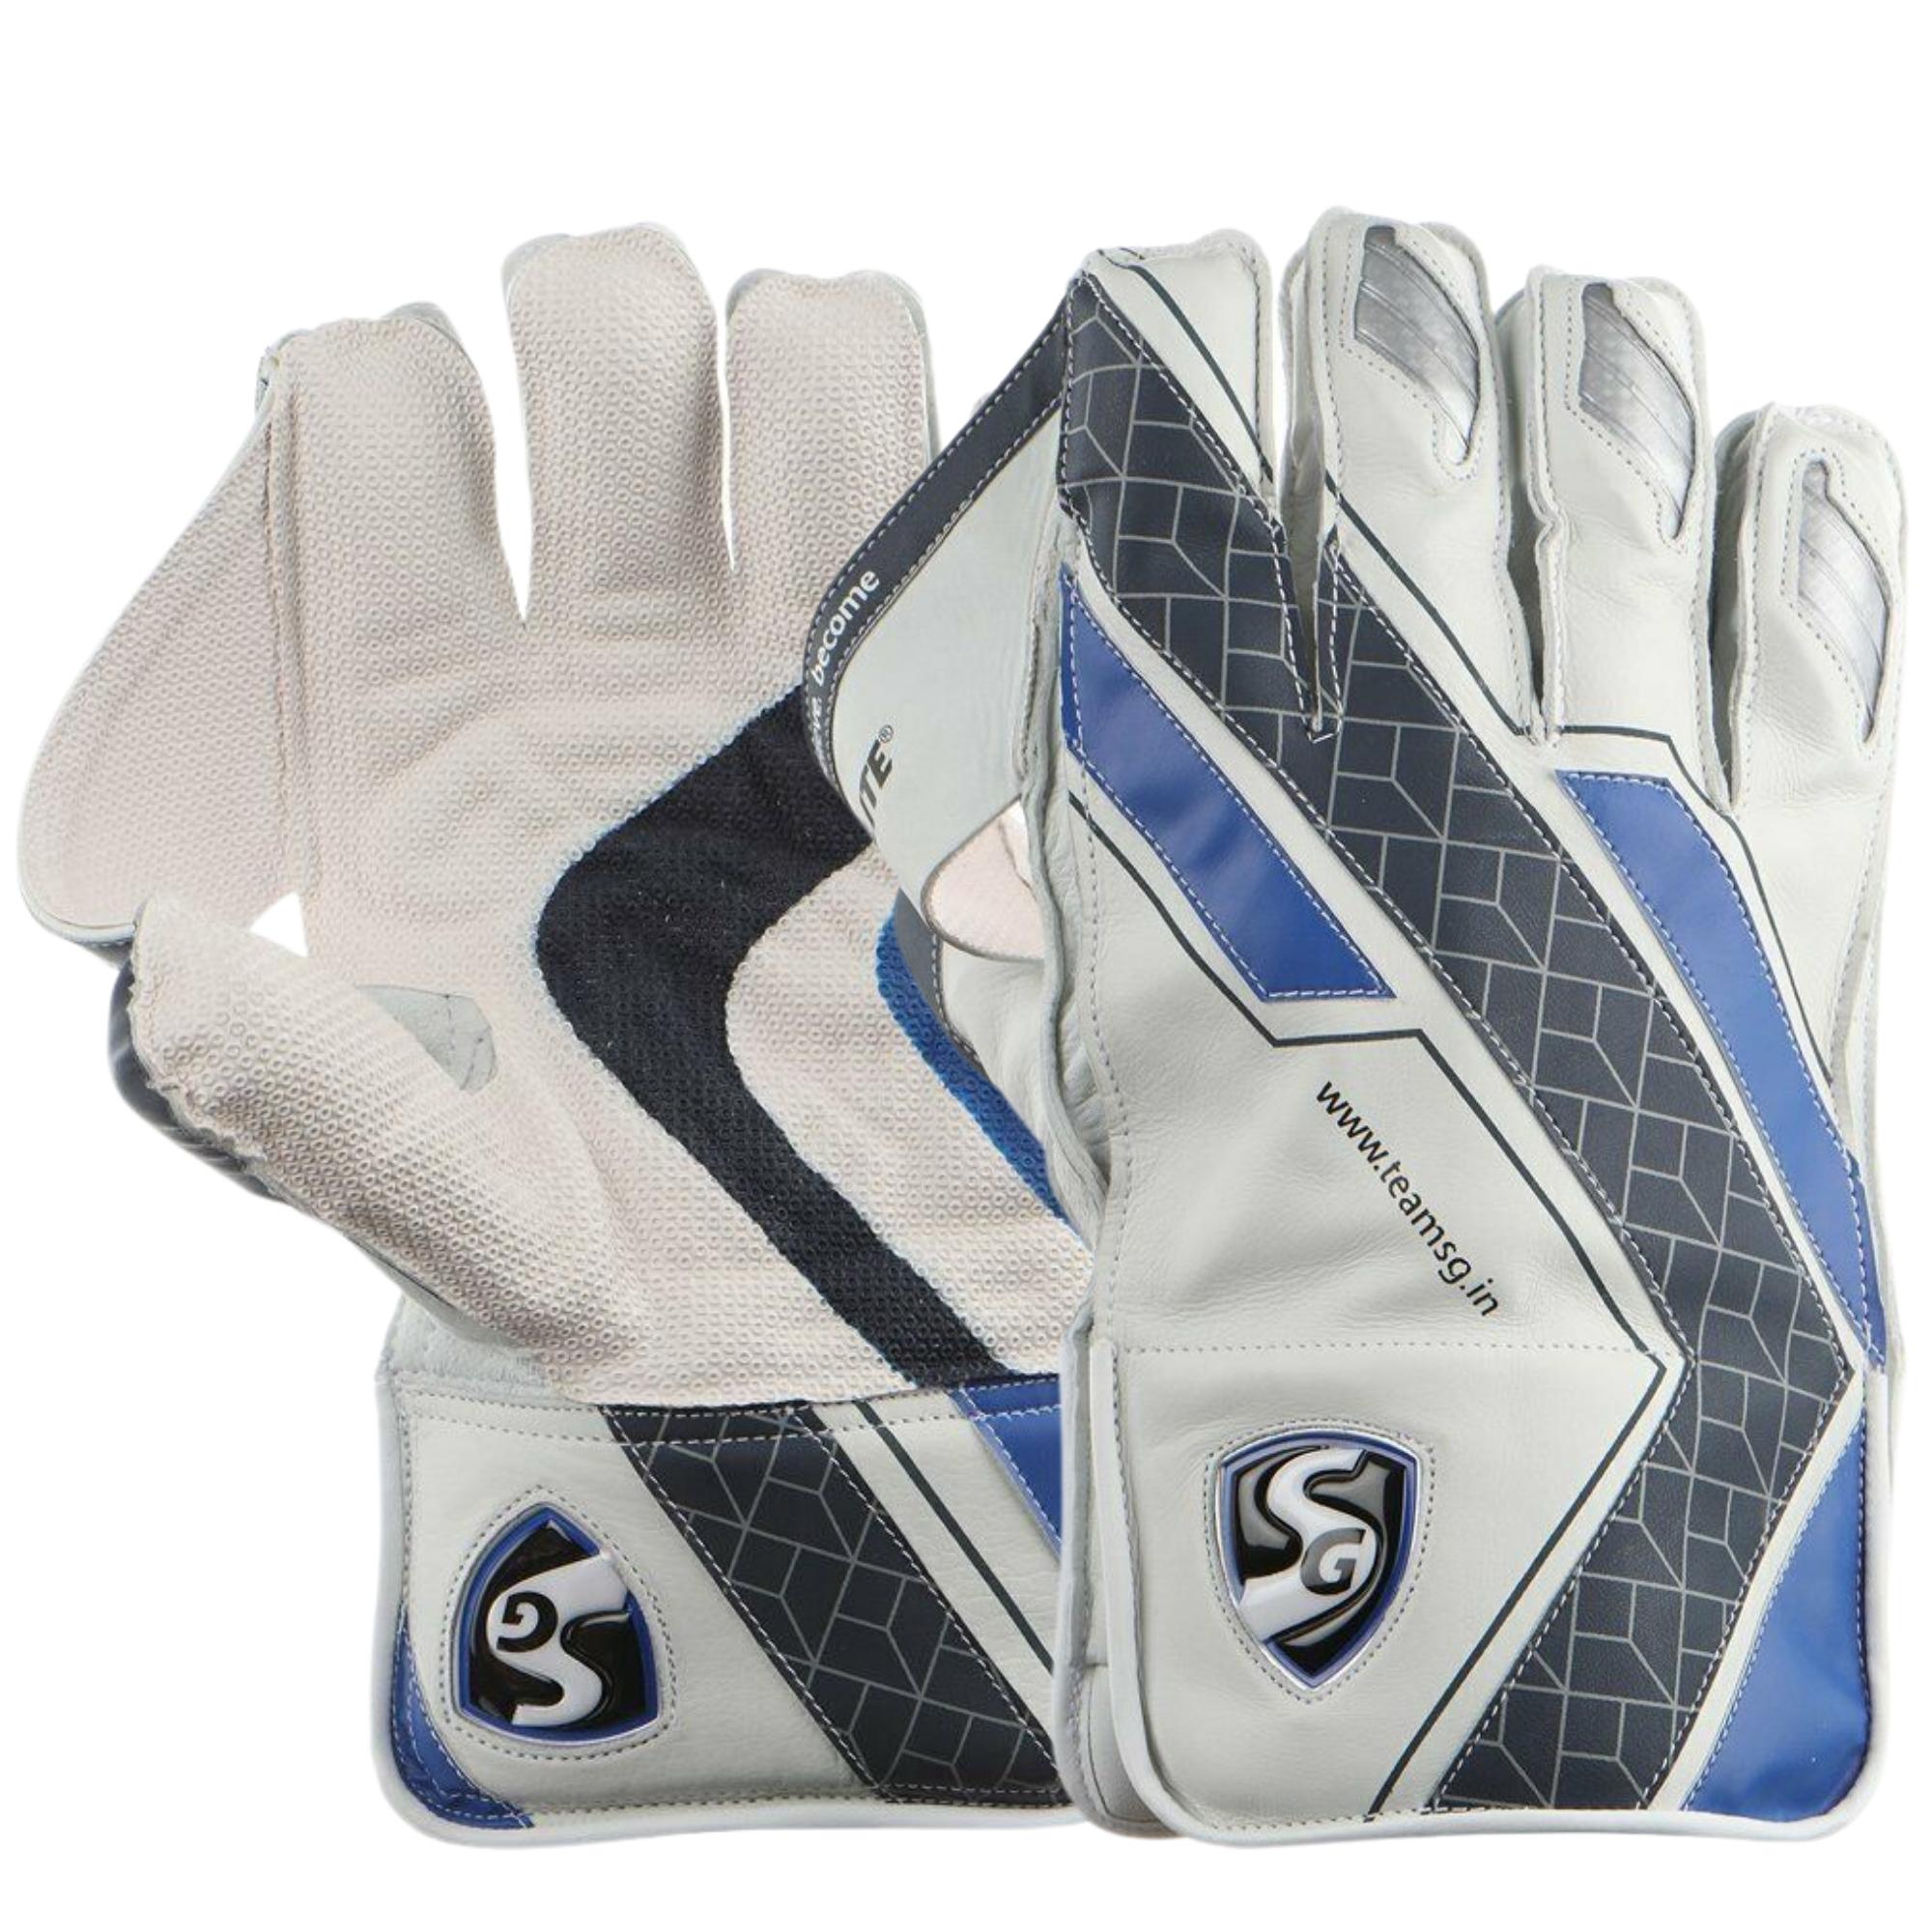 SG Wicket Keeping Gloves Hilite